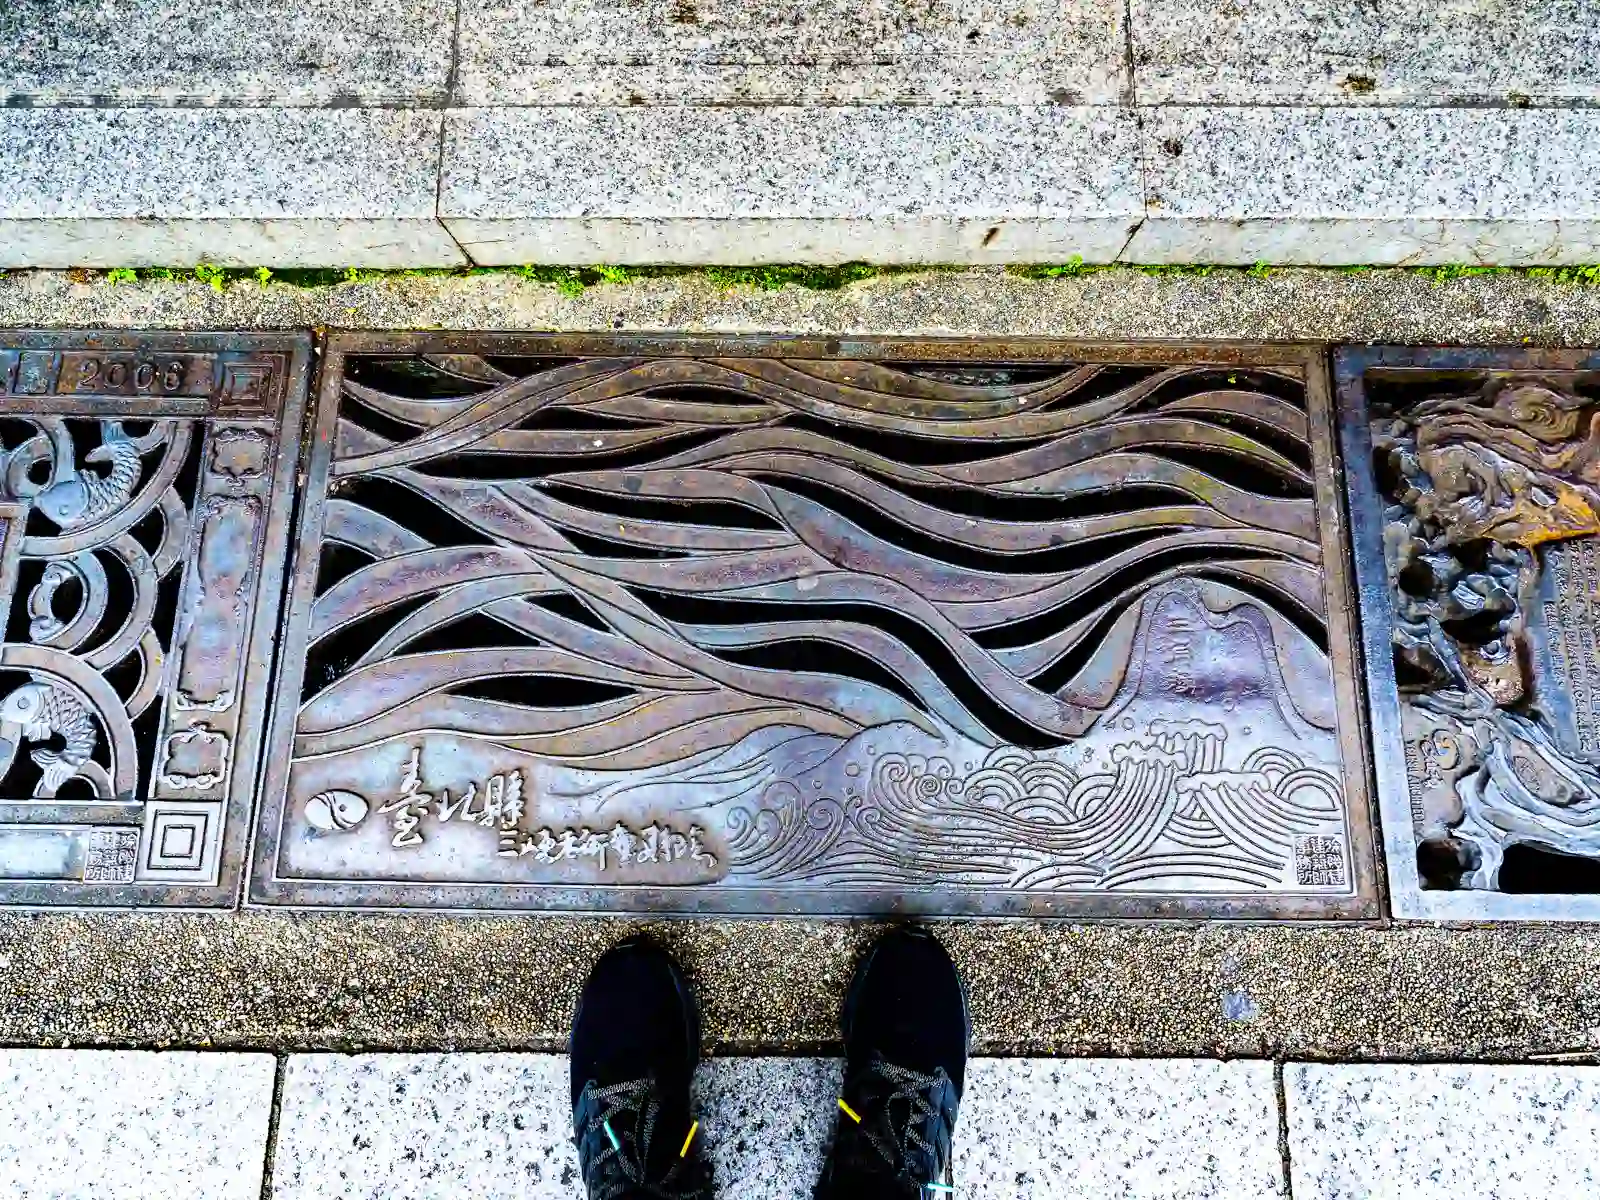 A decorative sewer grate features carved wavy patterns.